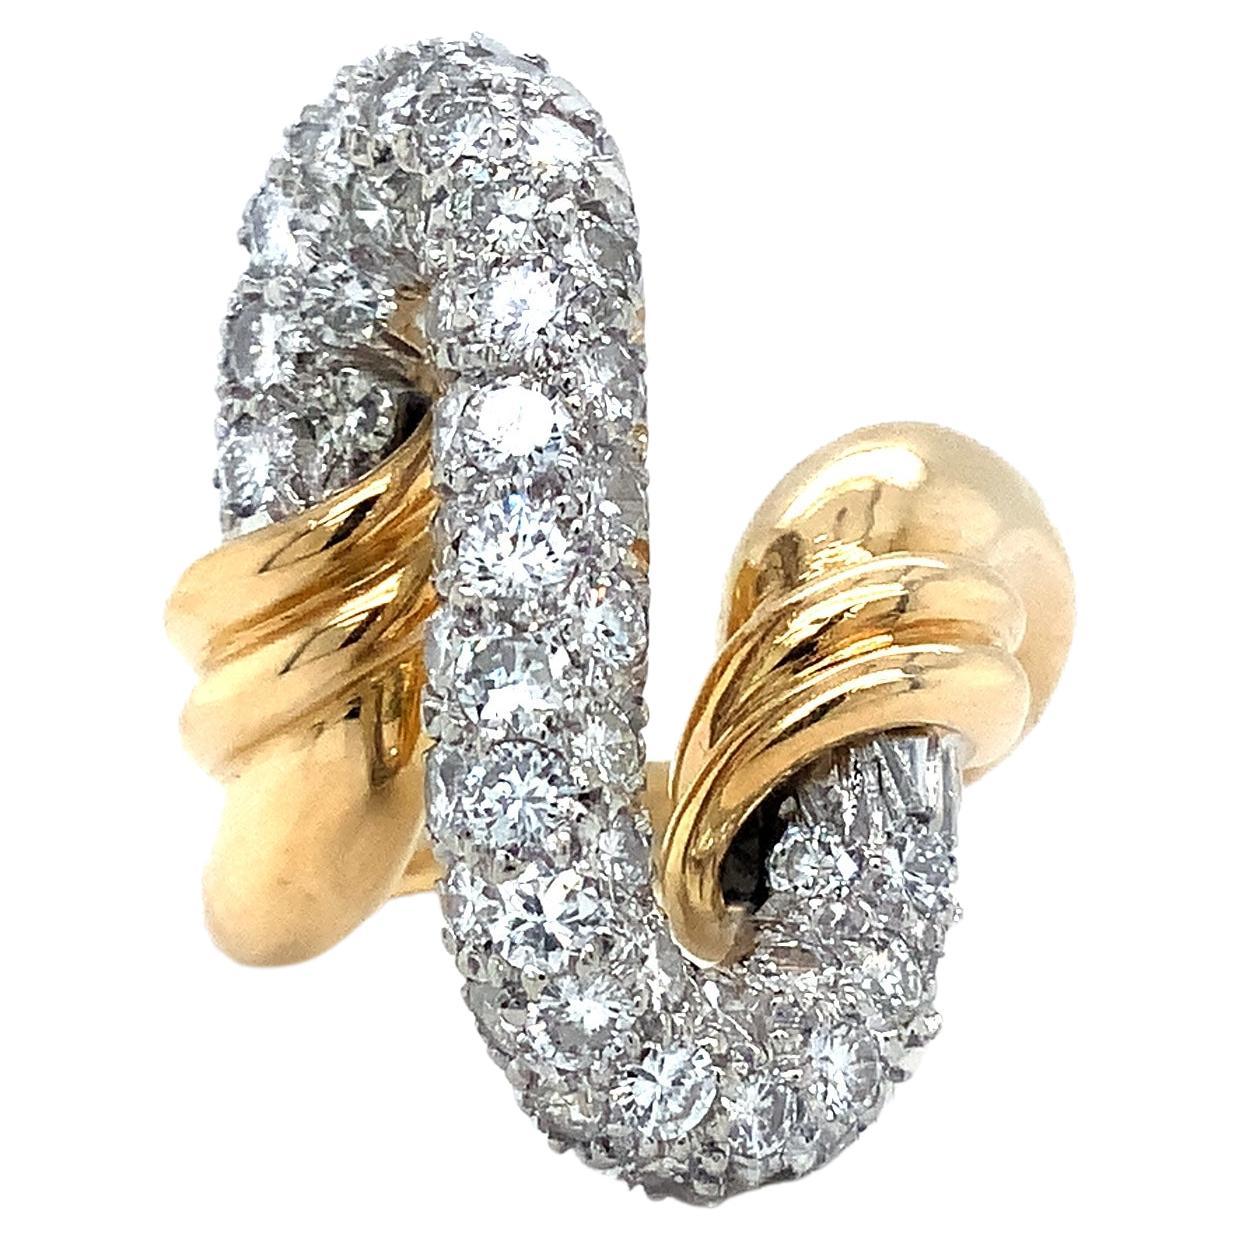 Vintage Pave Diamond Ring Fashioned in 18 kt Yellow and White Gold. For Sale